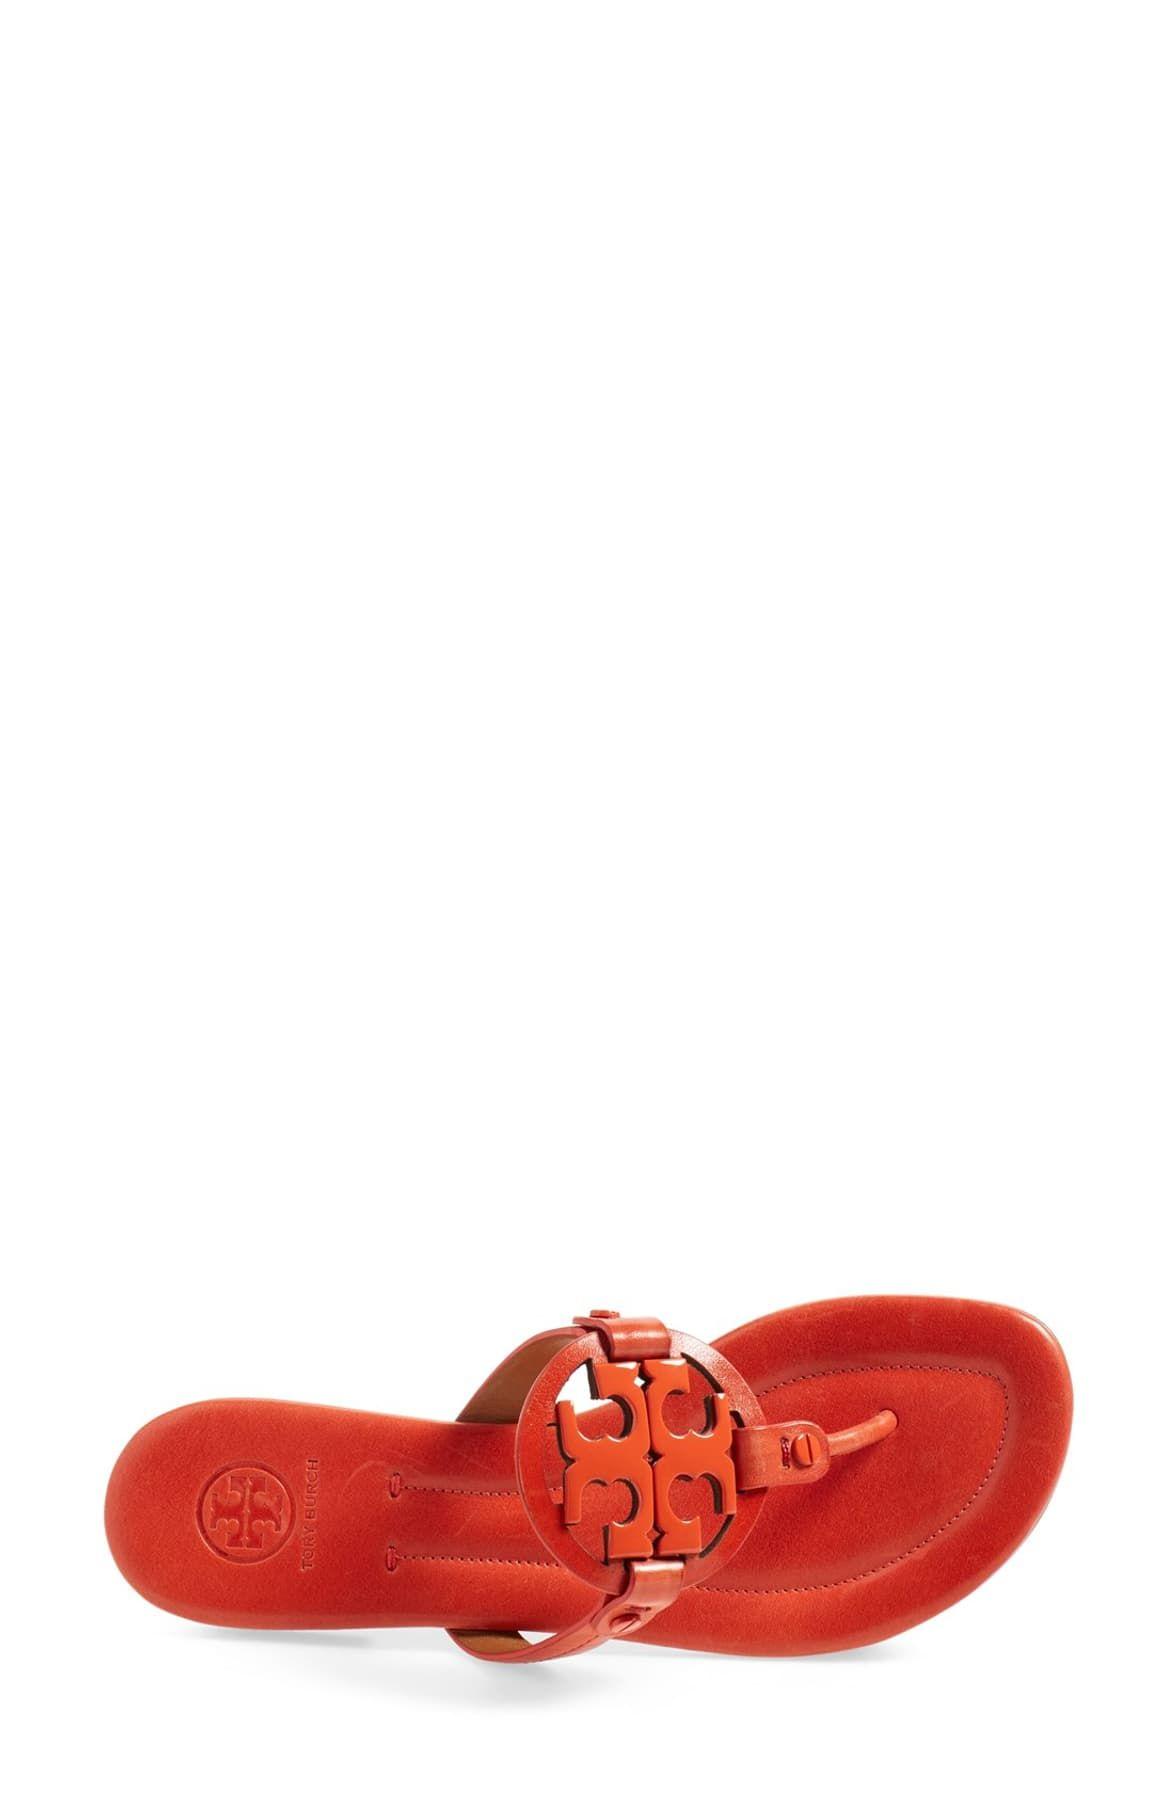 Tory Burch Miller Sandal, Leather in Red | Lyst